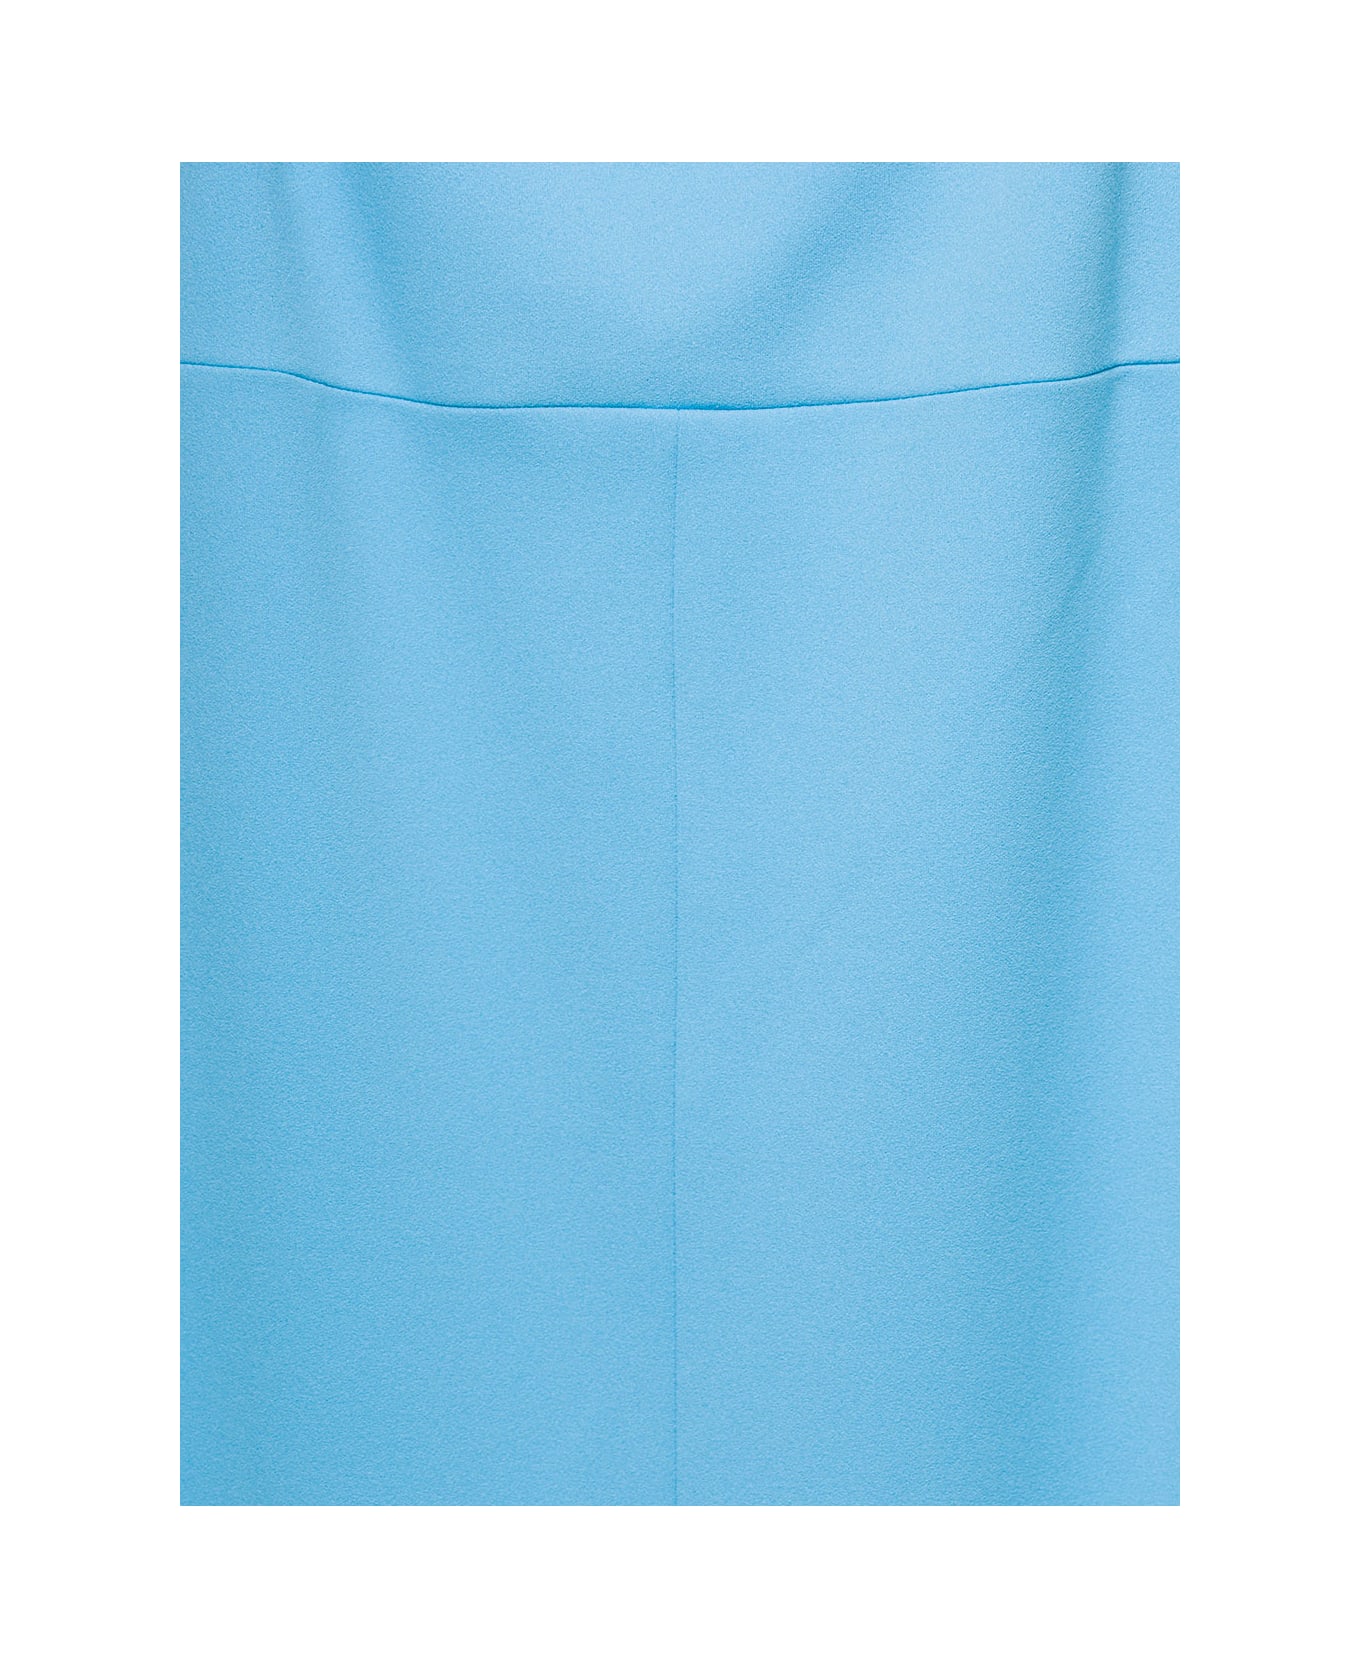 Solace London Light Blue Sofia Knitted Maxi-dress In Polyester Stretch Woman - Blu